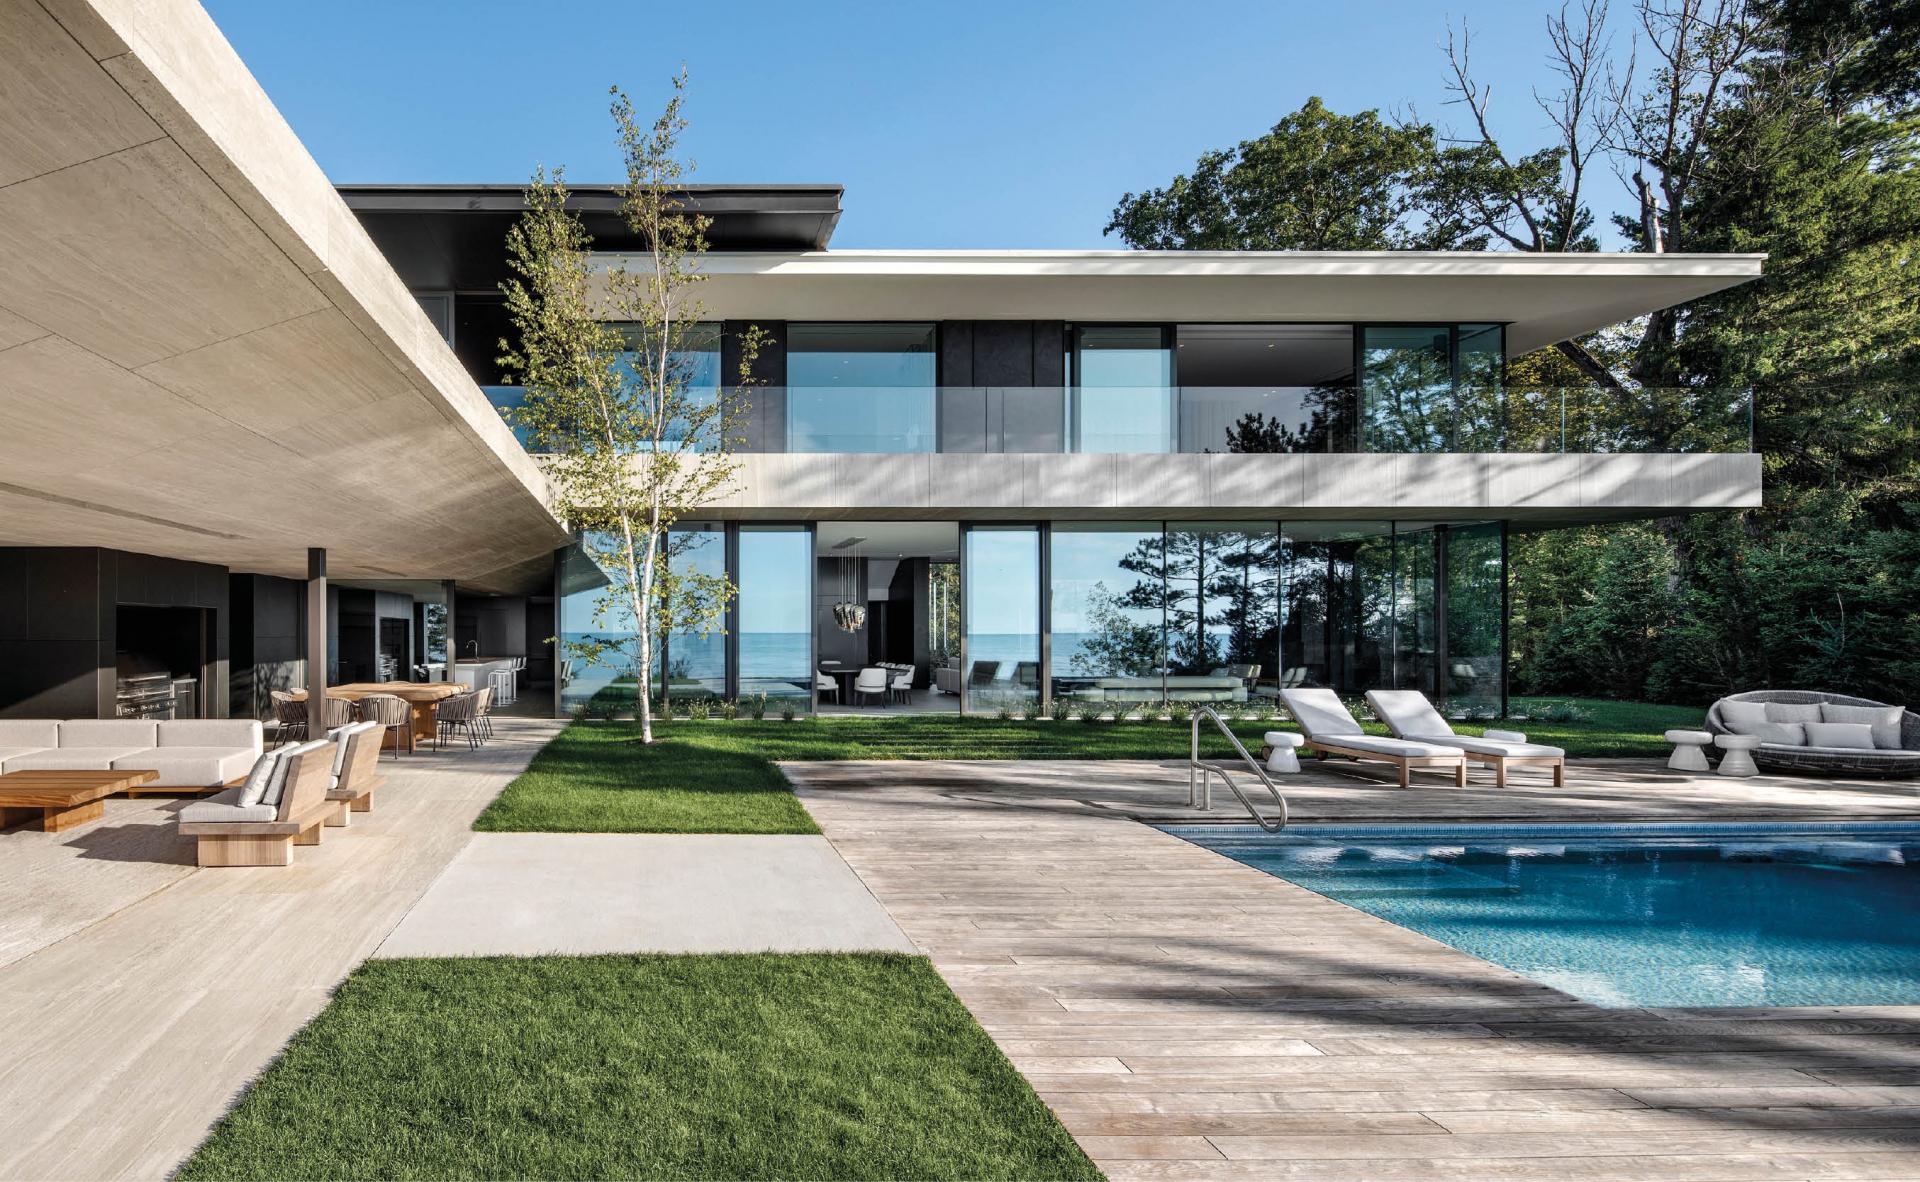 This Canada Home is Unobtrusive and Set Respectfully within its Environment